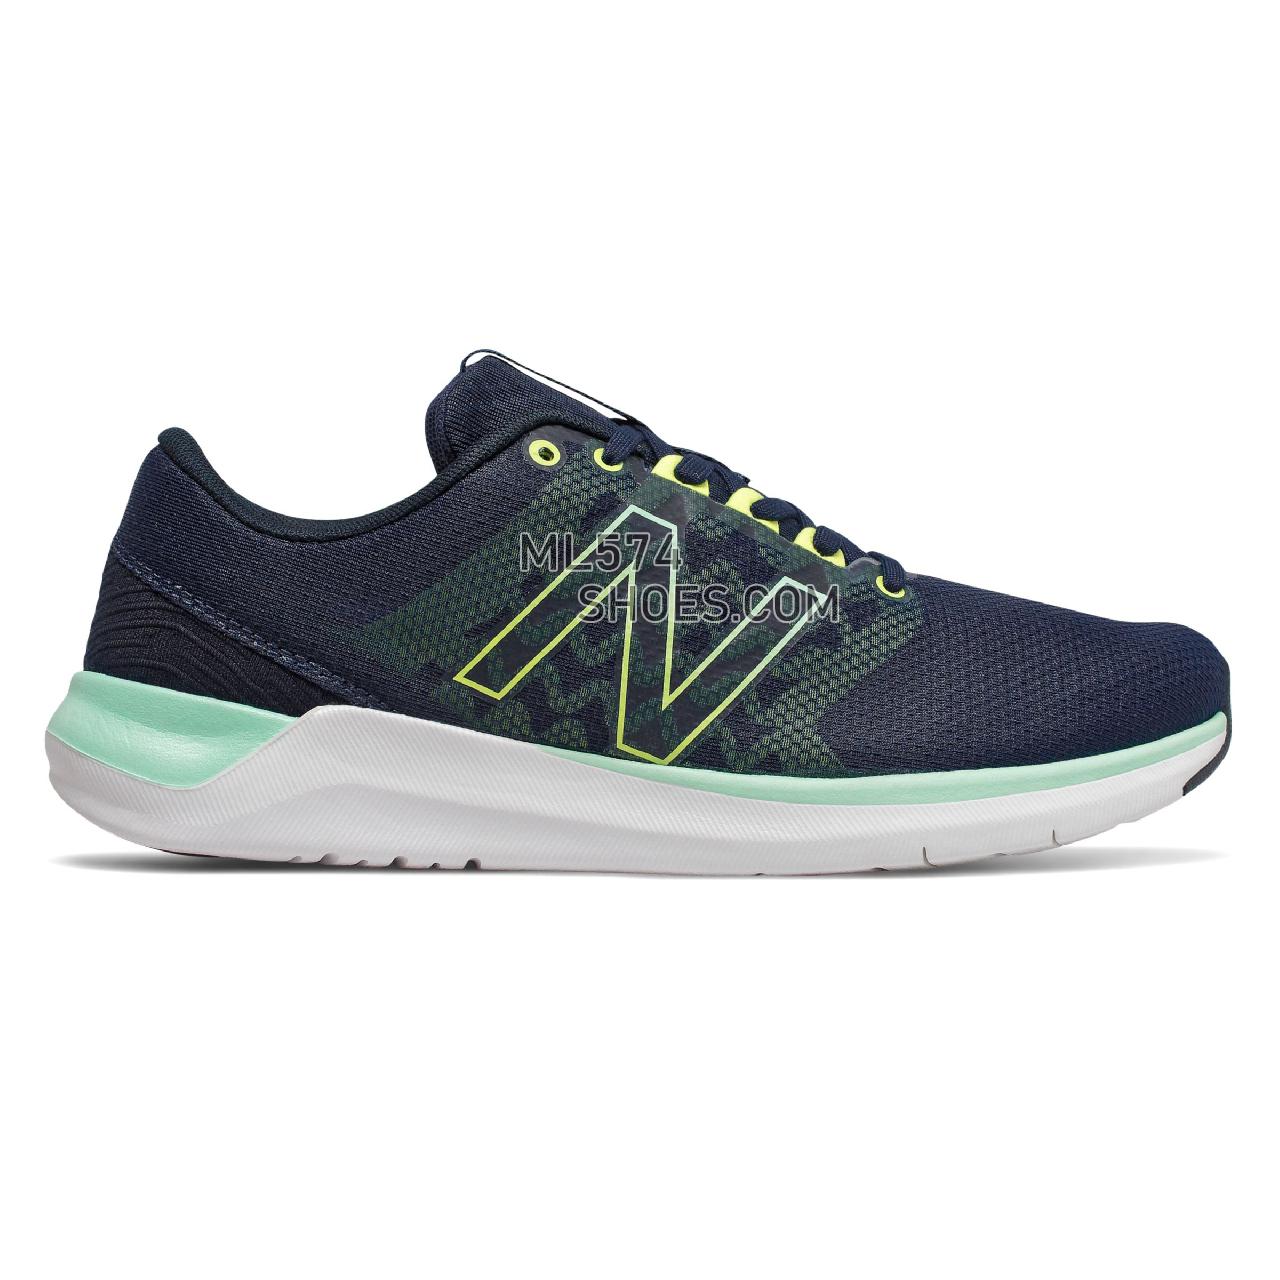 New Balance CUSH+ 715v4 - Women's Workout - Natural Indigo with Neo Mint and White - WX715LN4